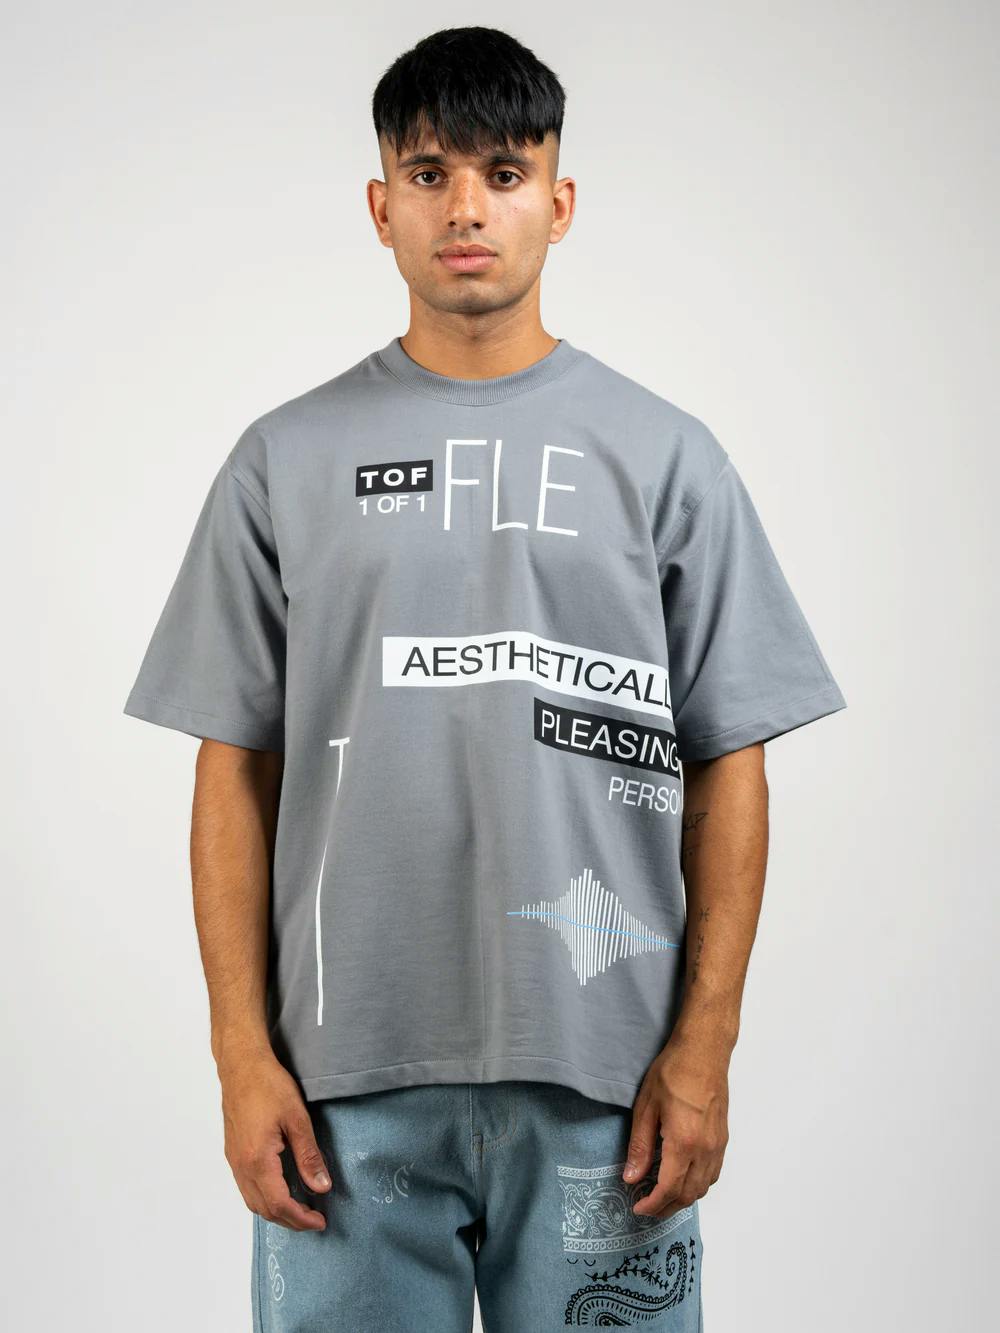 Charcoal Aesthetic T-shirt, a product by TOFFLE